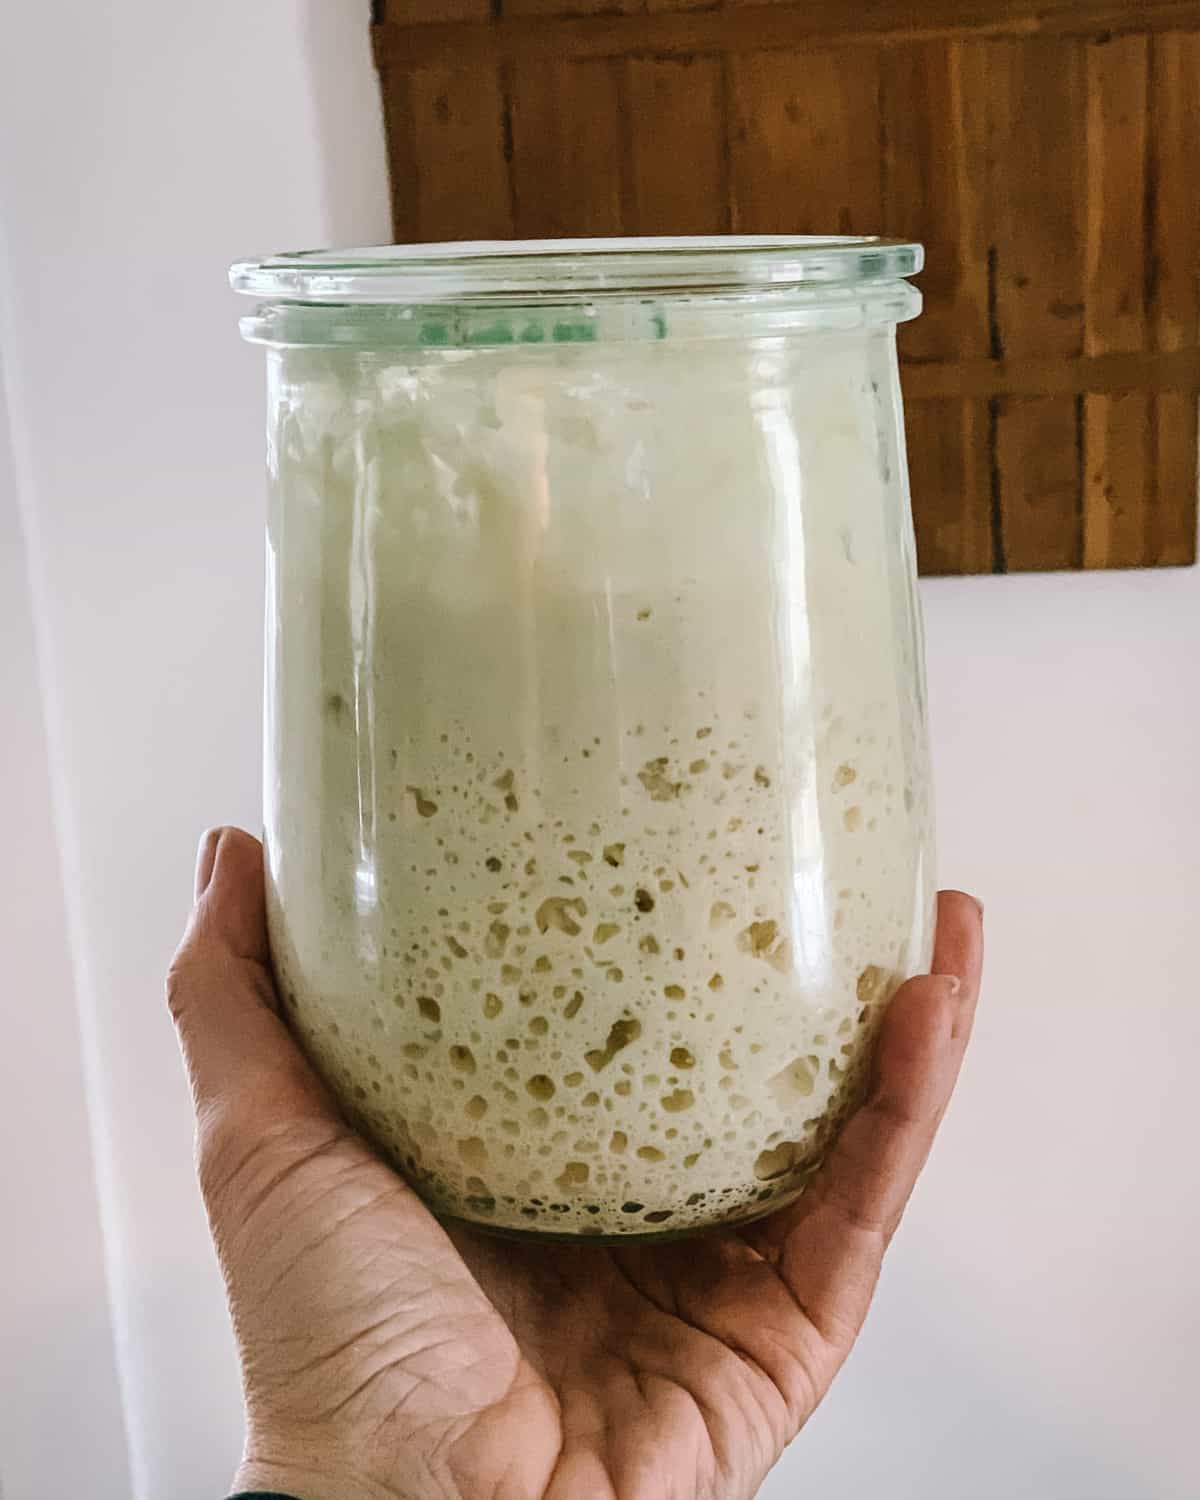 A hand holding up a jar of sourdough starter, air bubbles can be seen at the bottom.